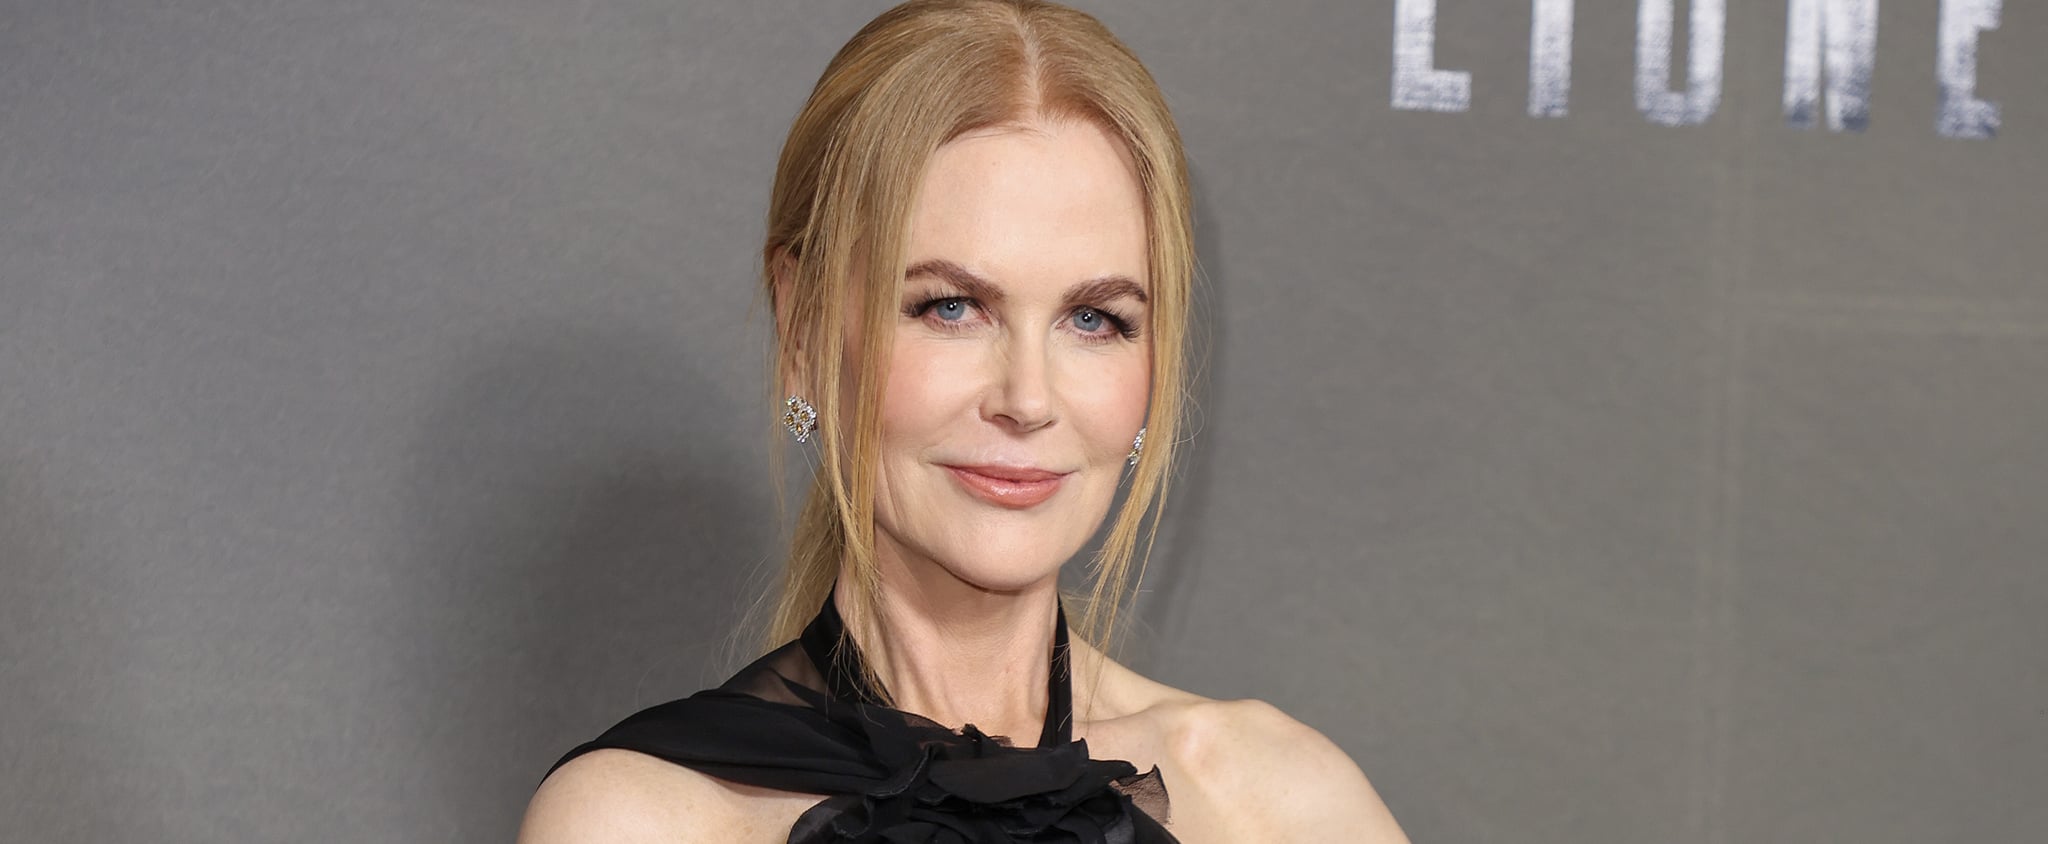 Nicole Kidman shows some skin in stunning backless gown with thigh-high  split